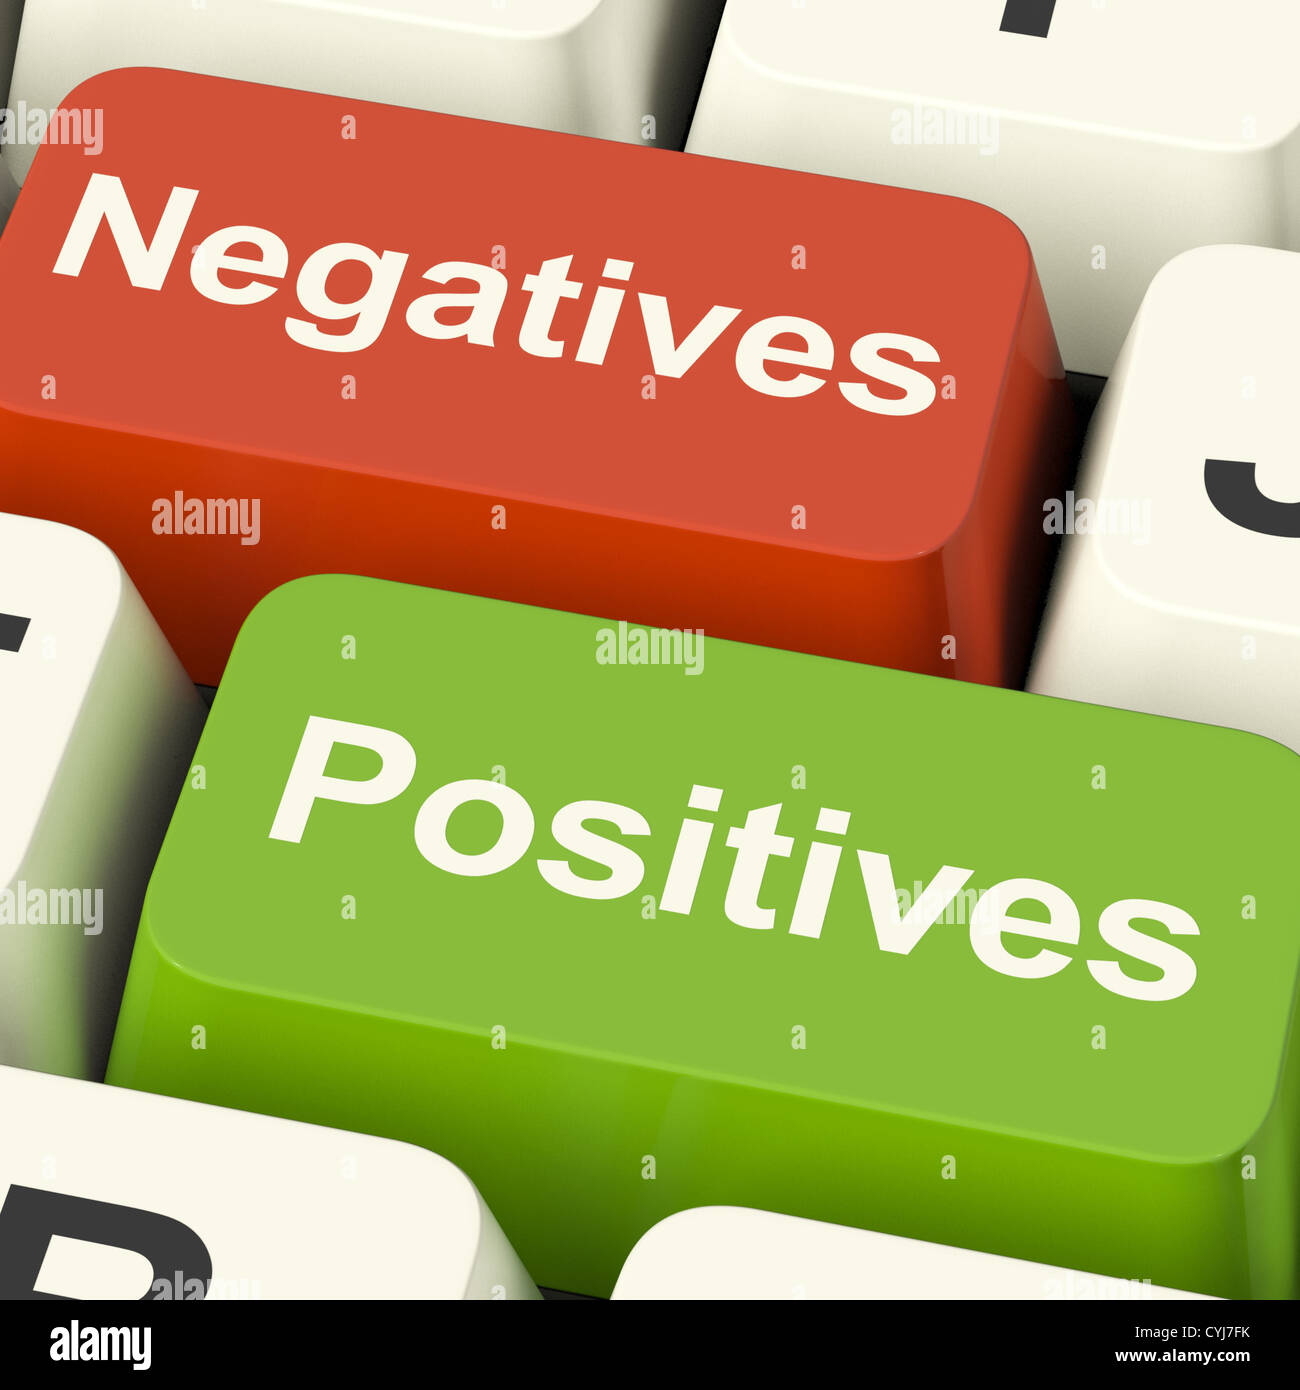 Negatives Positives Computer Keys Shows Plus And Minus Alternatives Analysis And Decisions Stock Photo